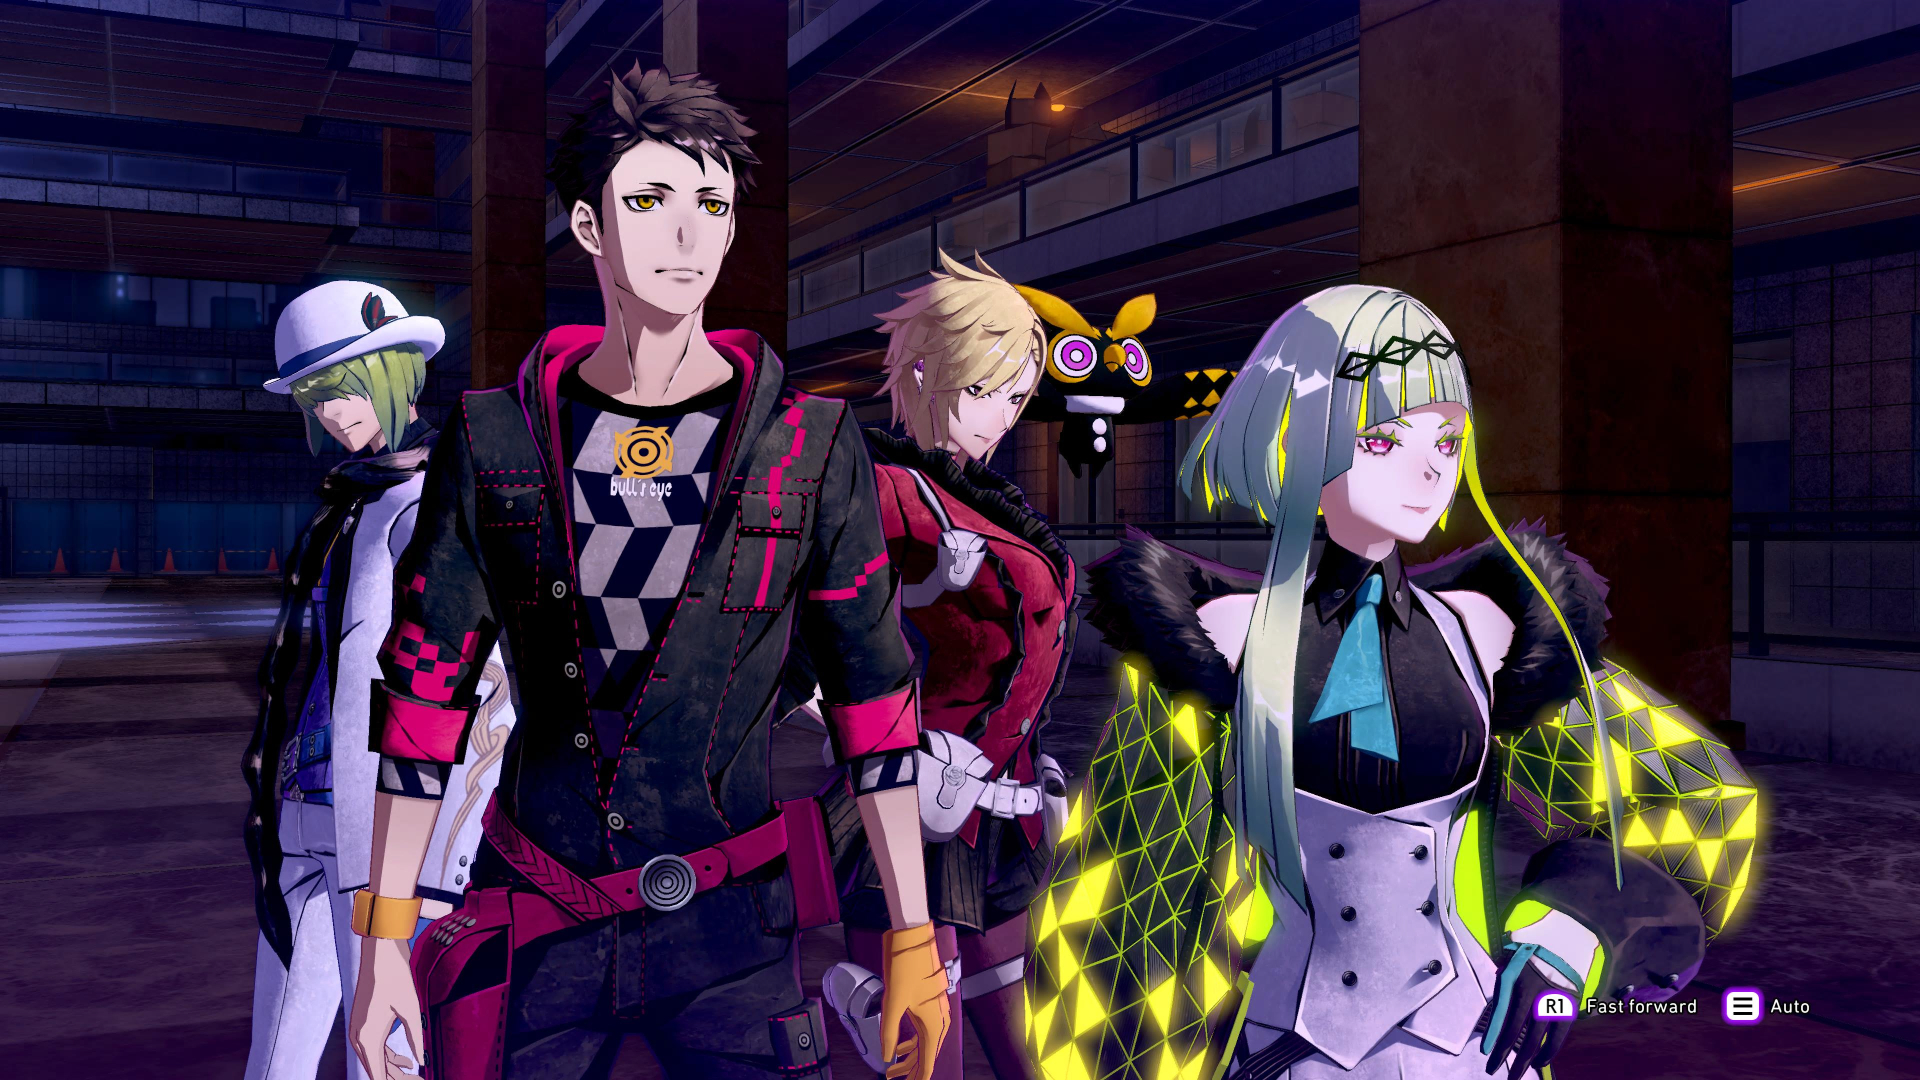 Roundup: Here's What The Critics Think Of JRPG 'Soul Hackers 2